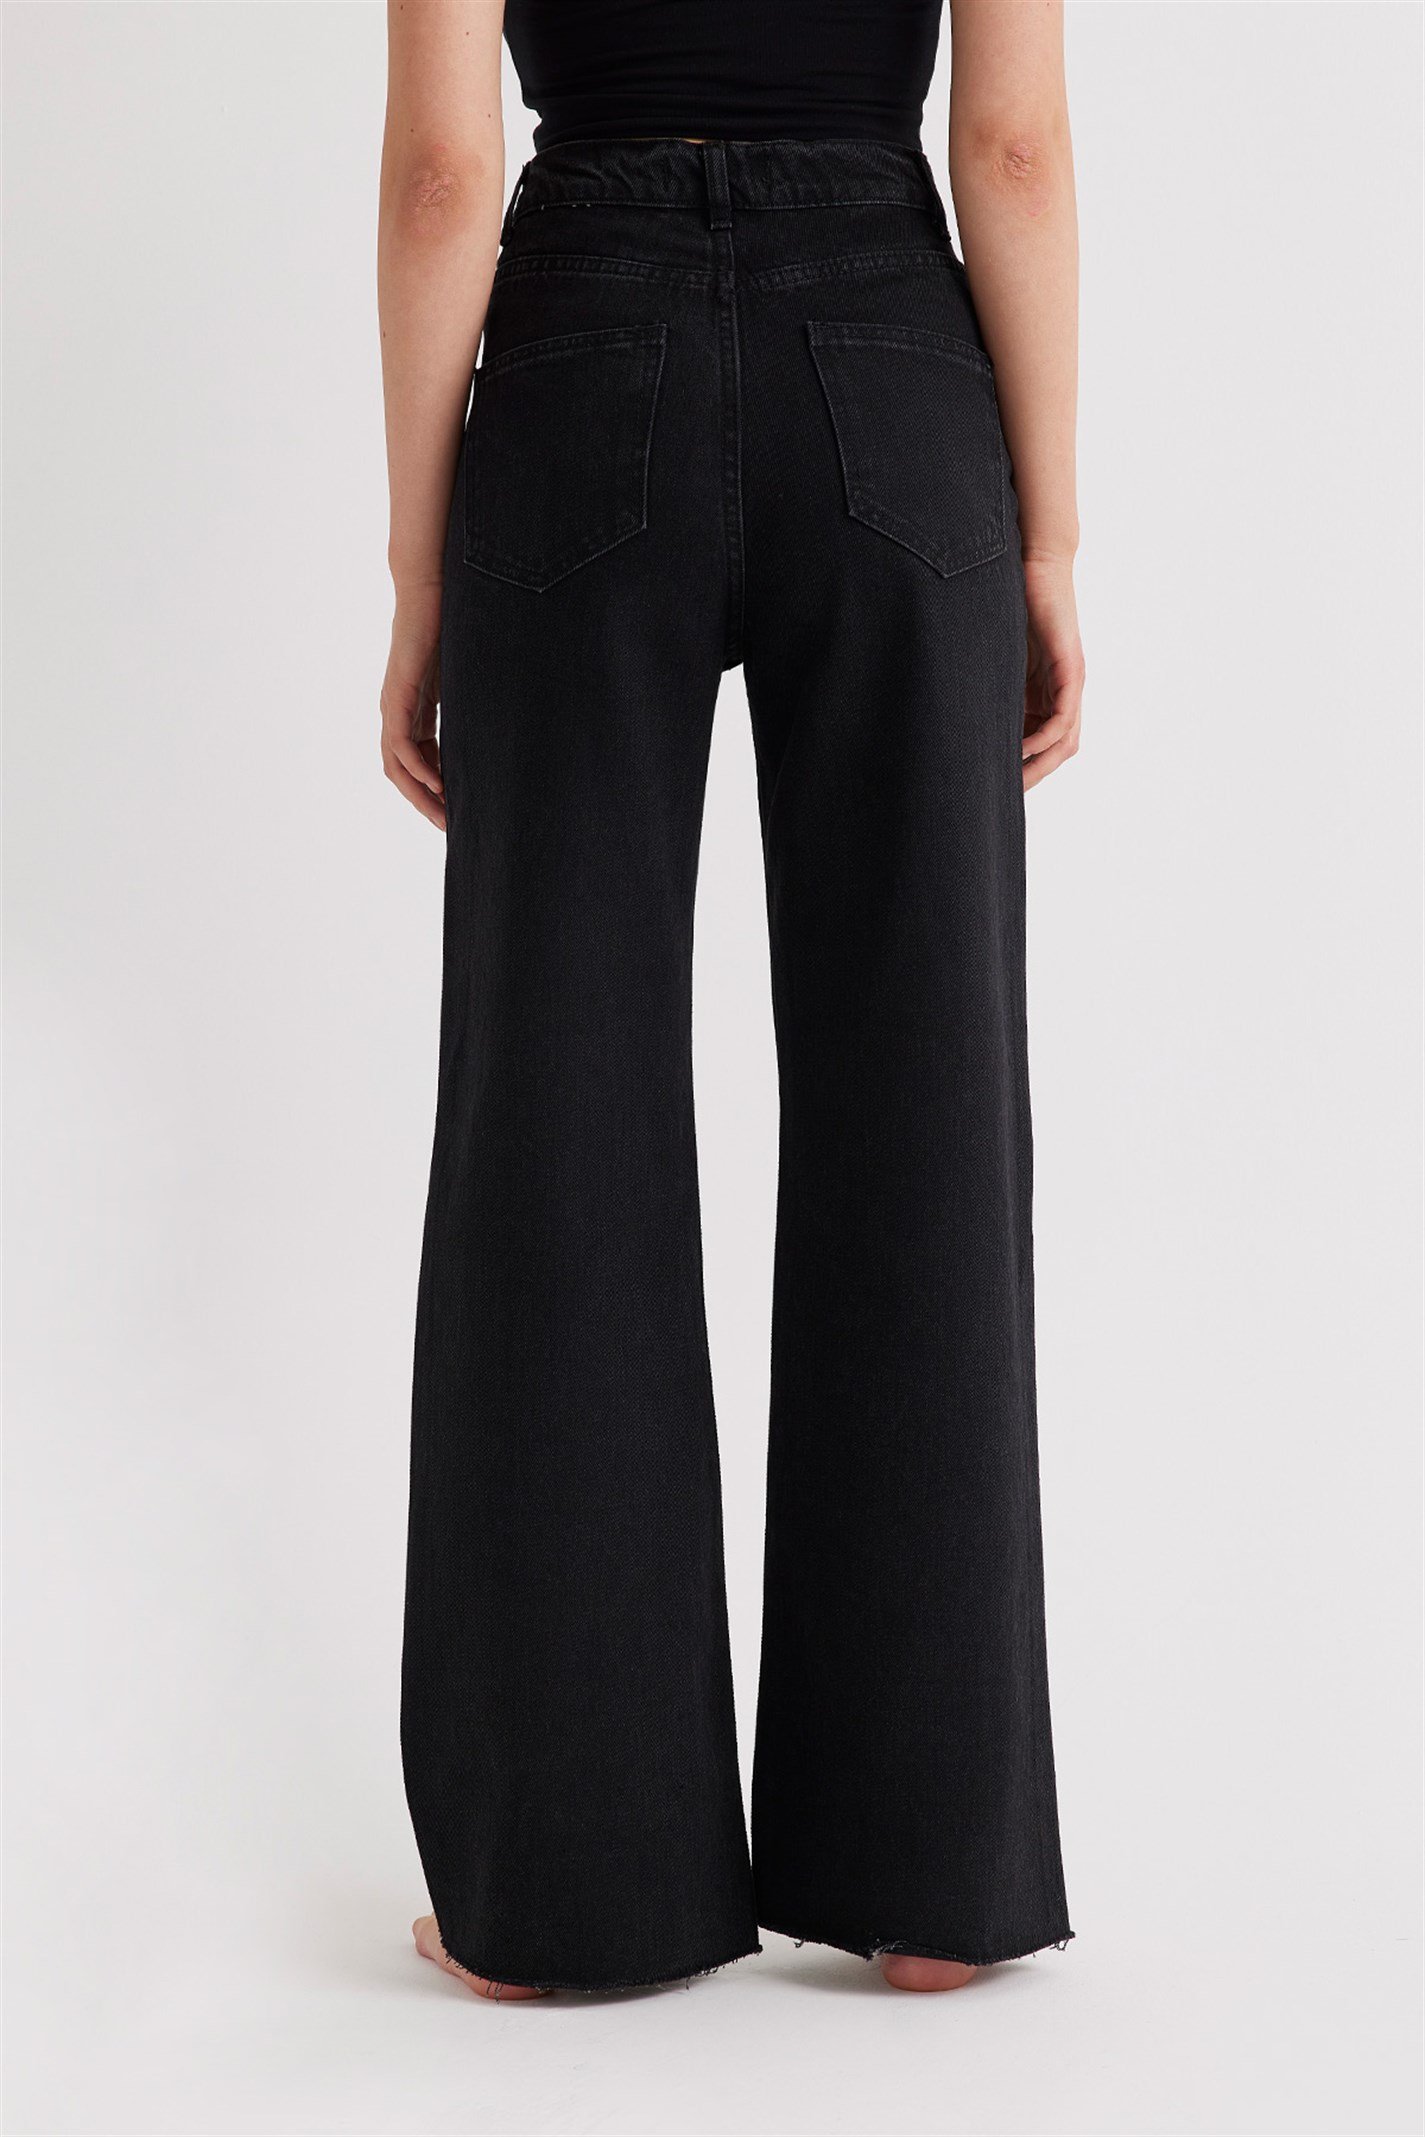 Black Shiny Stone Wide Leg Jean | Suud Collection